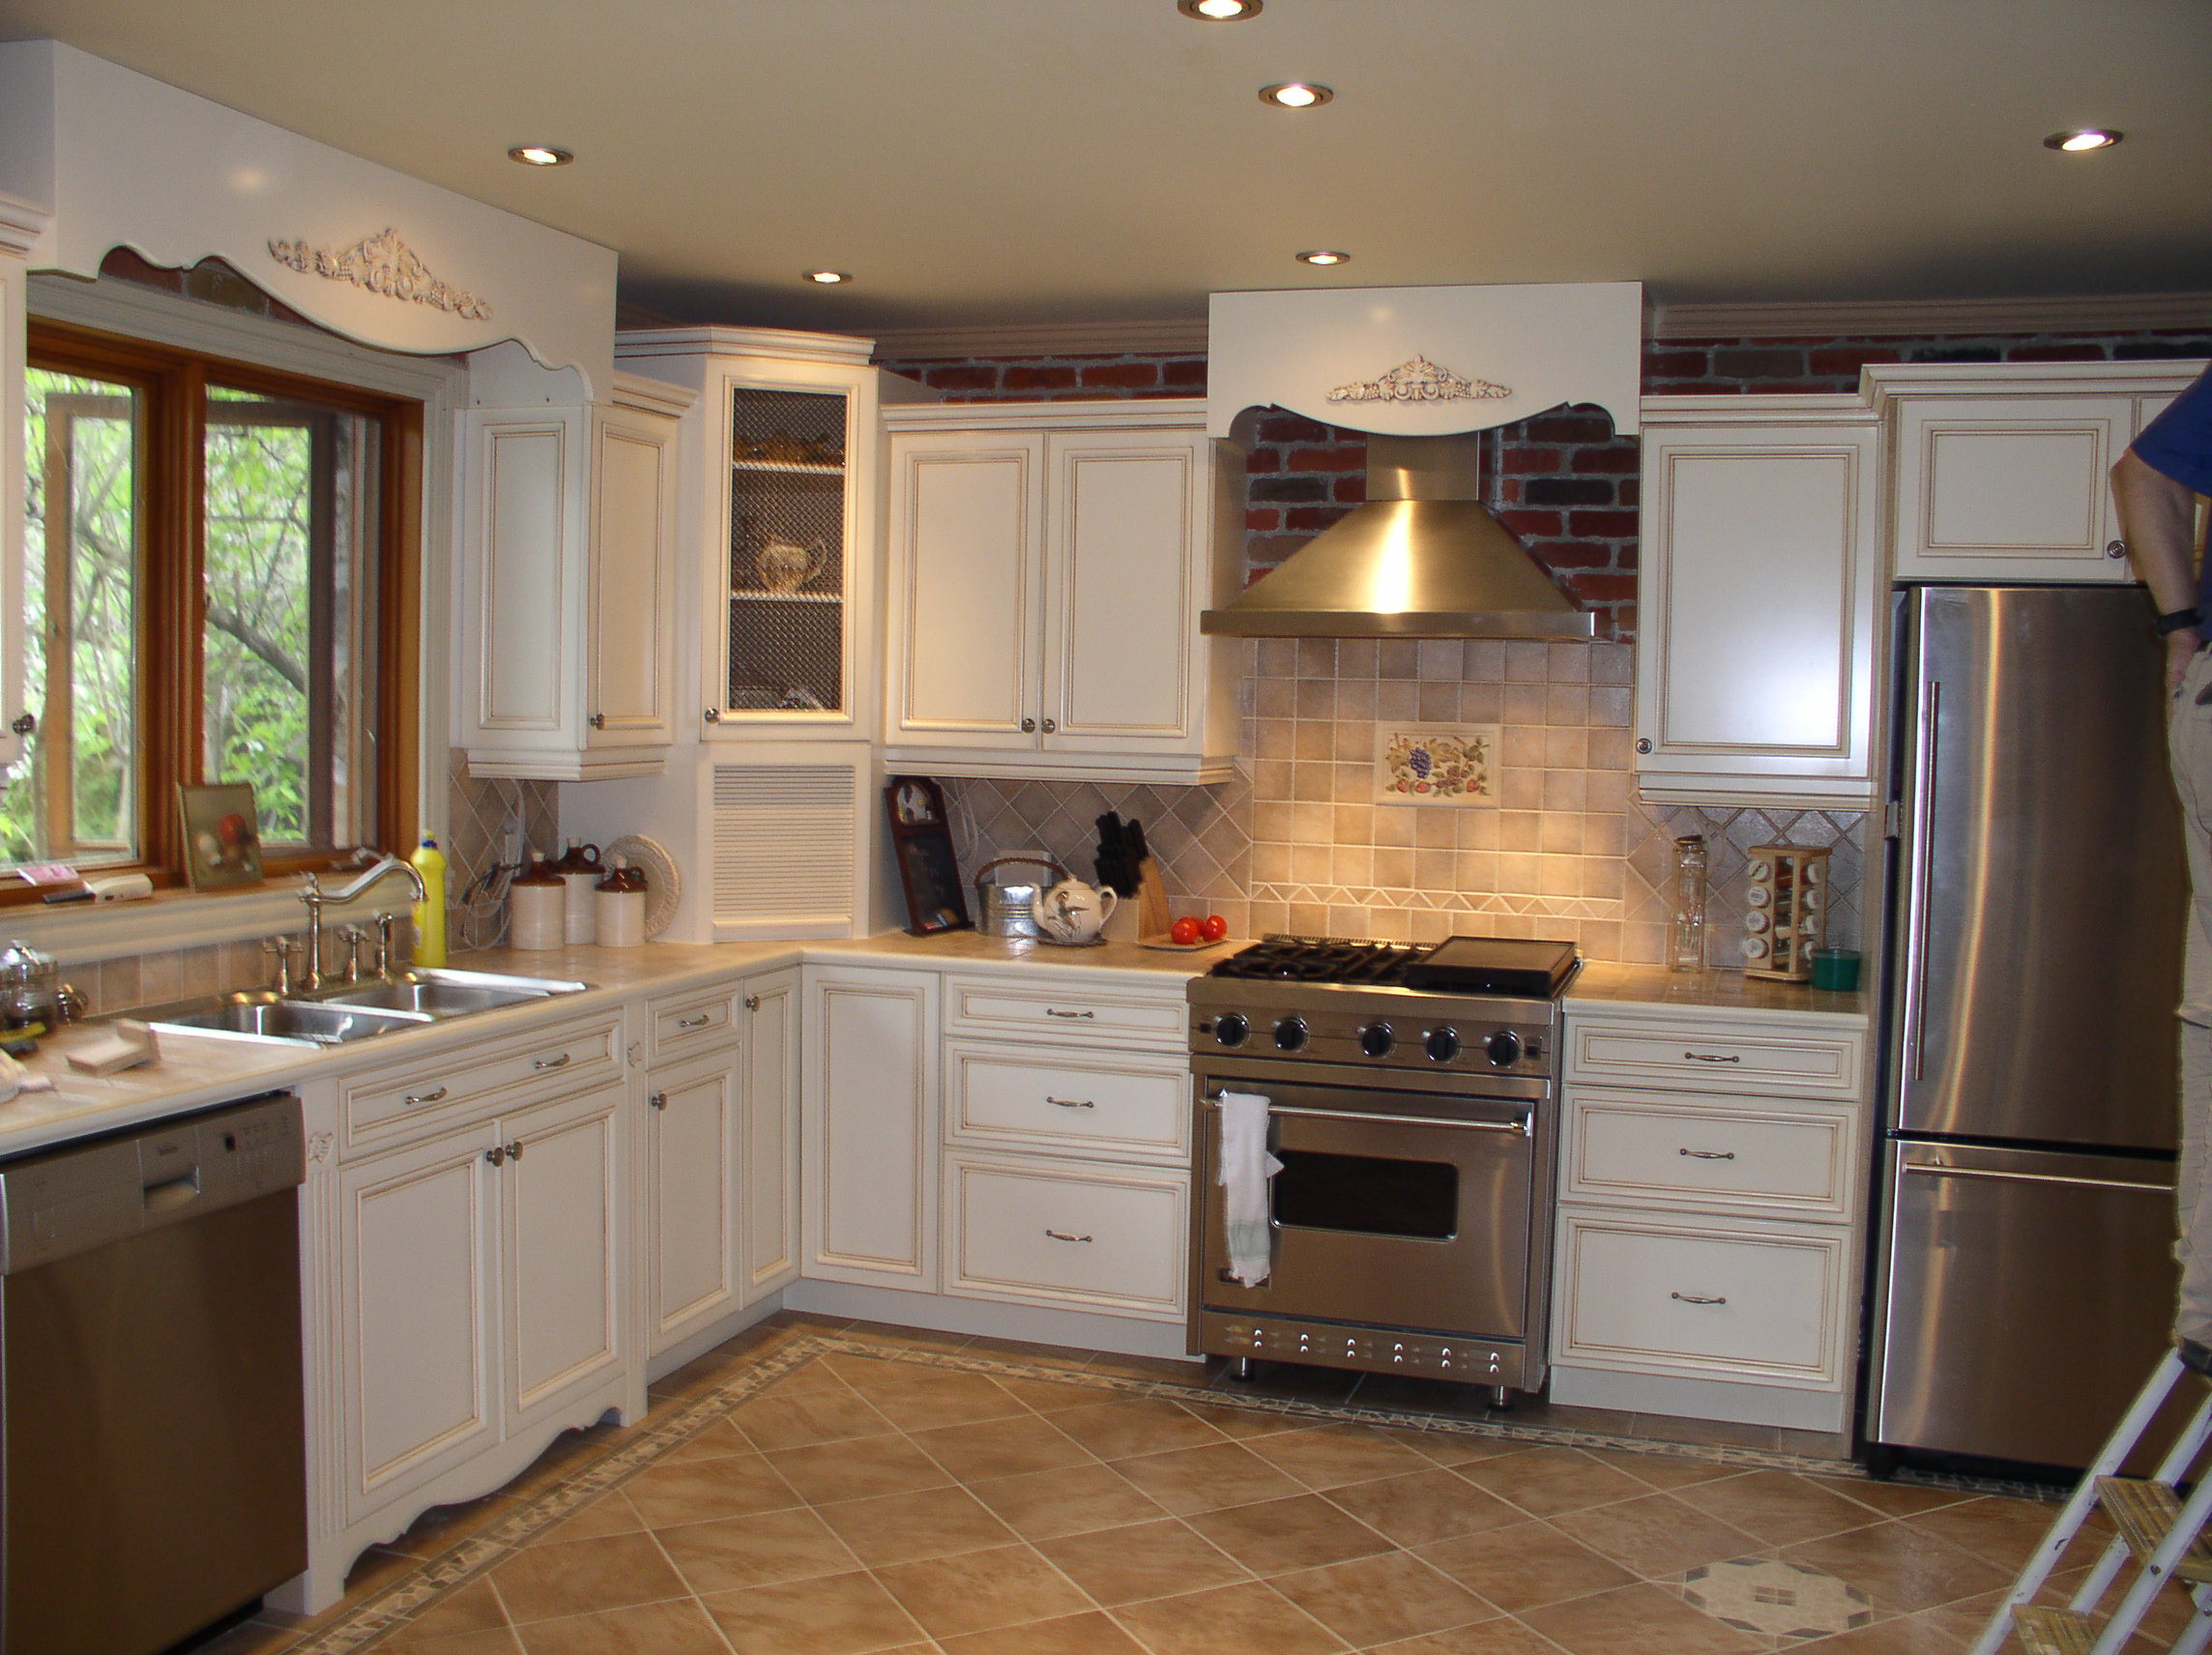 Kitchen Remodel Ideas Images
 Kitchen Remodeling Ideas & s